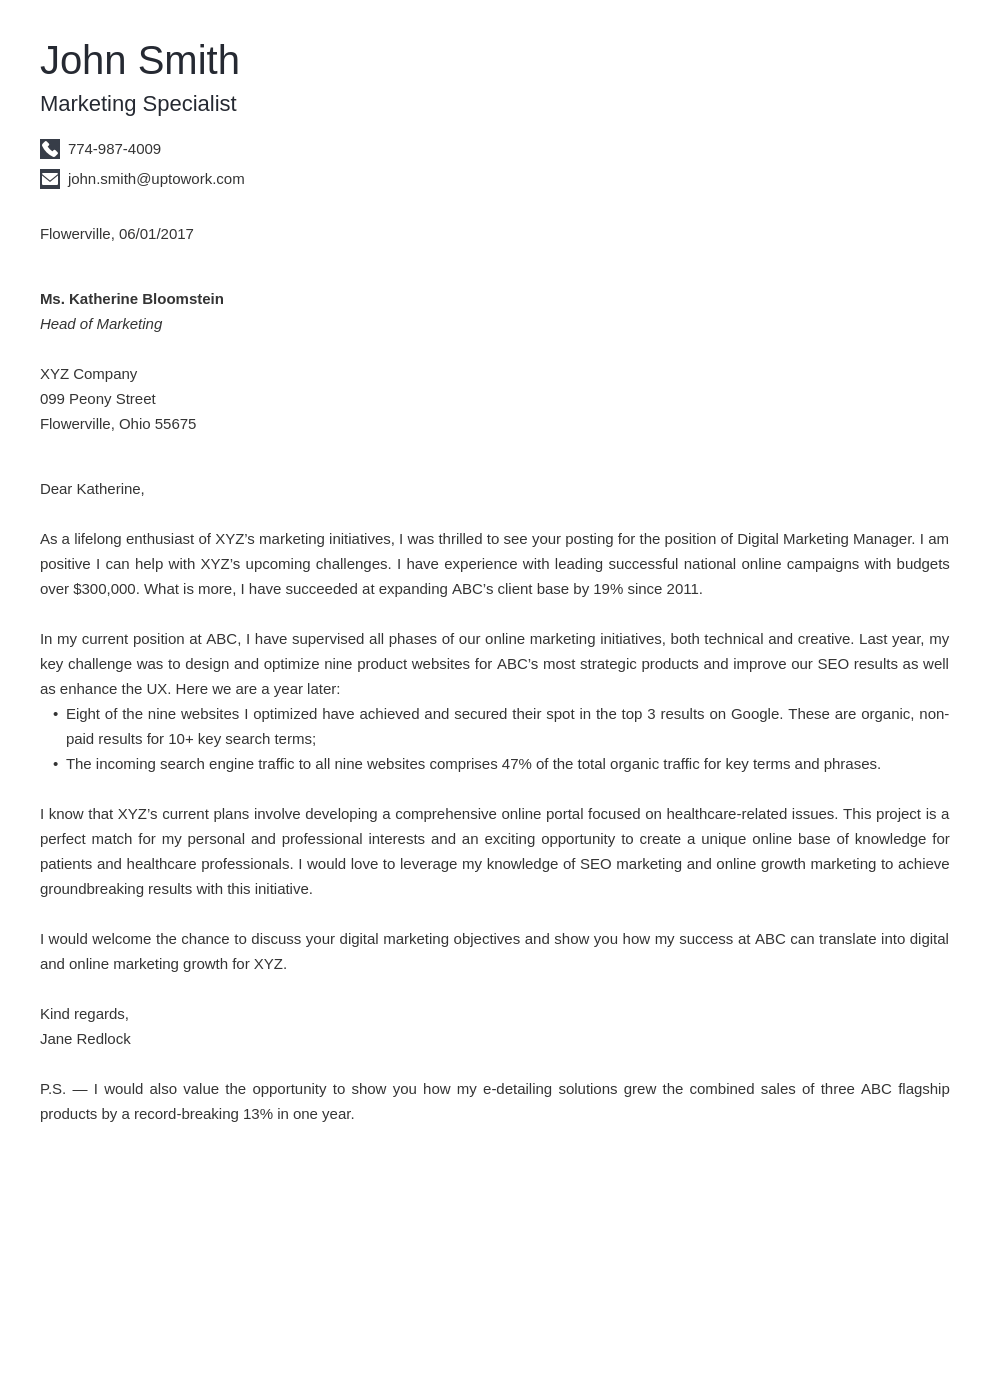 Basic Cover Letter Template Free from cdn-images.zety.com